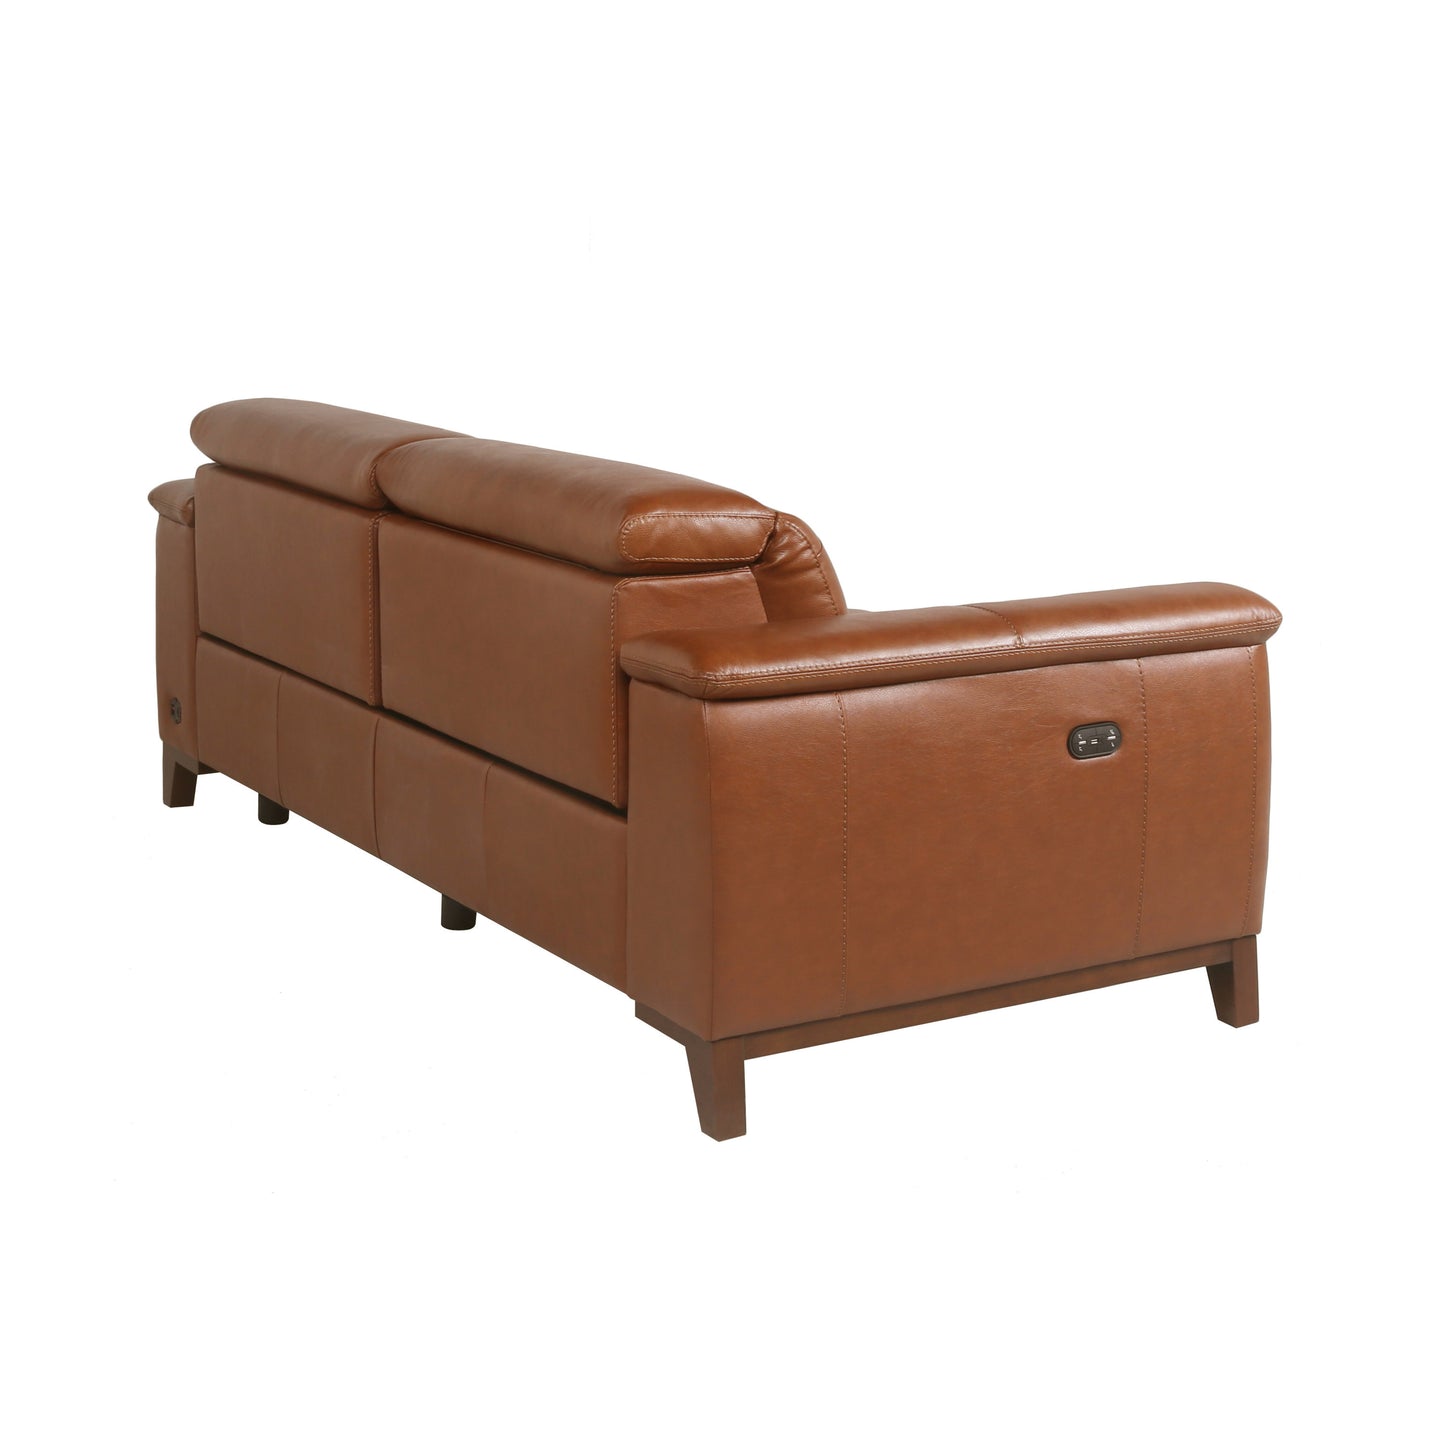 Dual-Power Leather Reclining Sofa - Articulating Power Headrest, Padded Armrest - Coach Colored, Luxurious Comfort